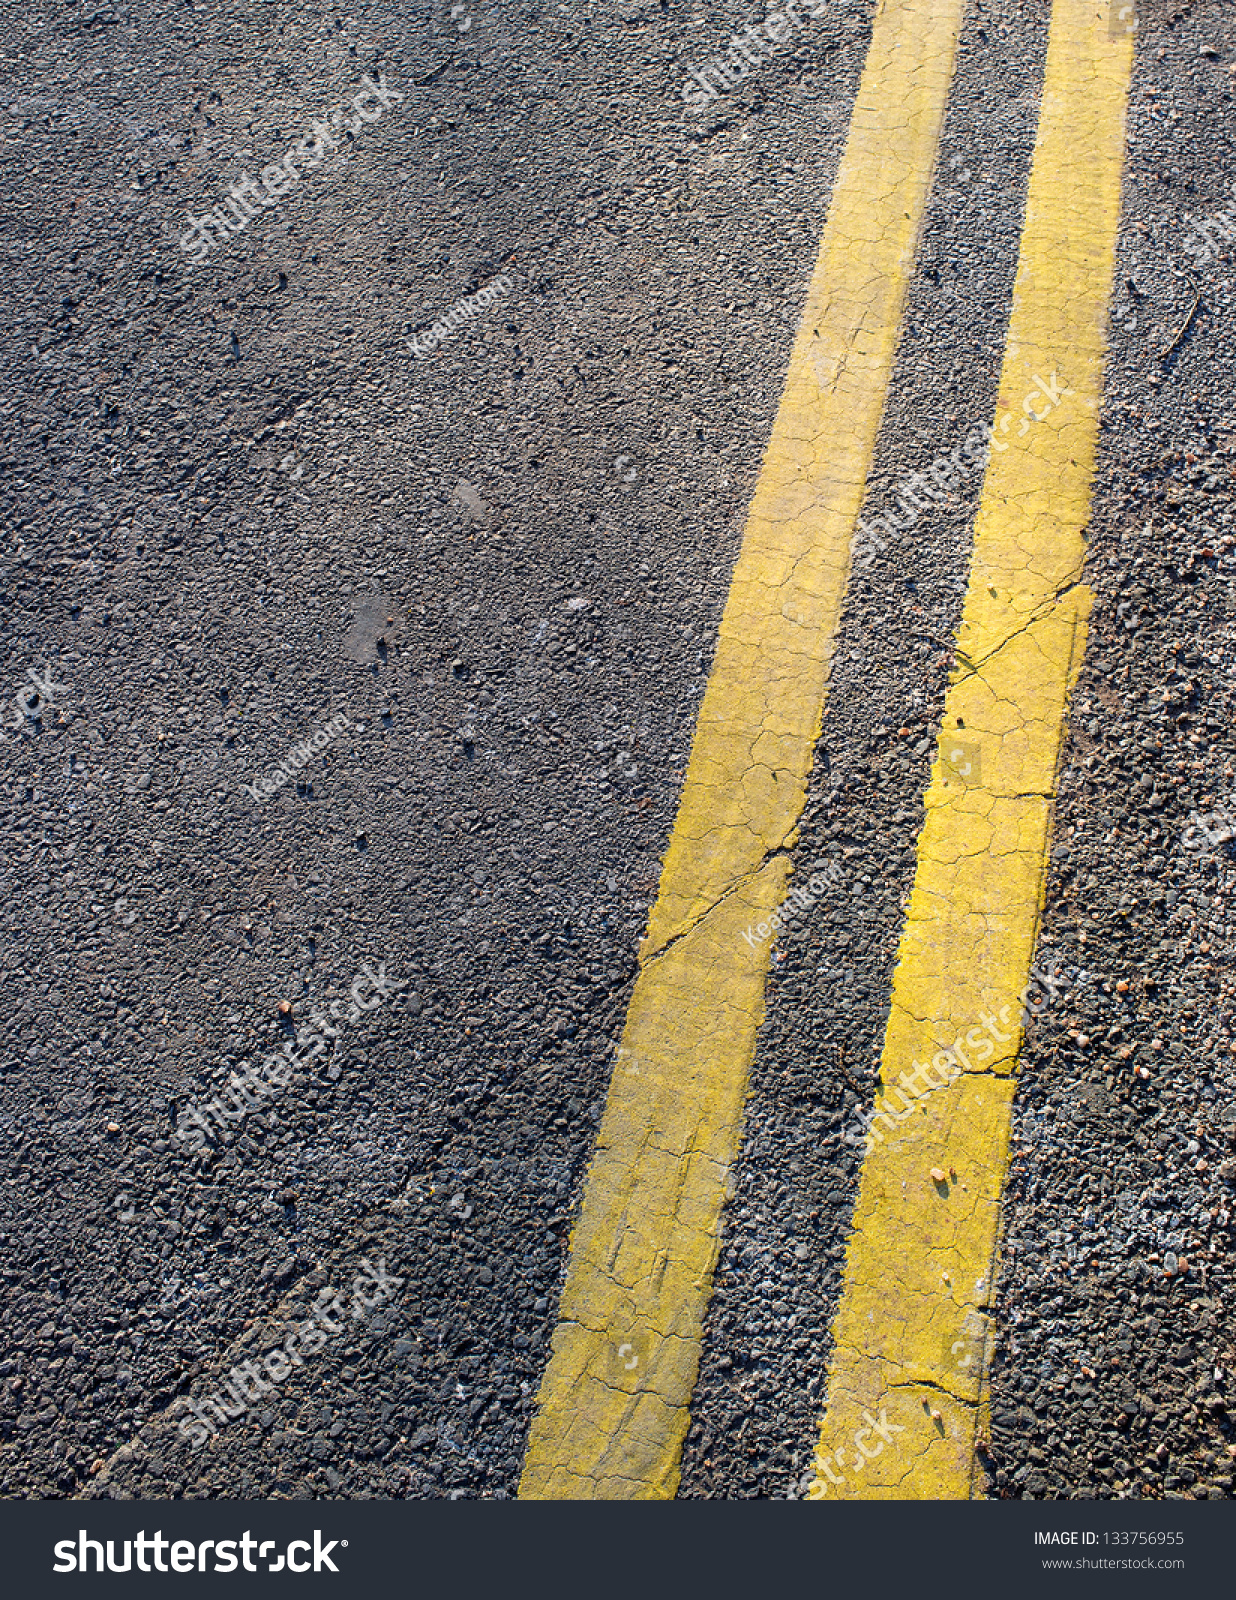 Road Double Yellow Lines Stock Photo (Royalty Free) 133756955 ...